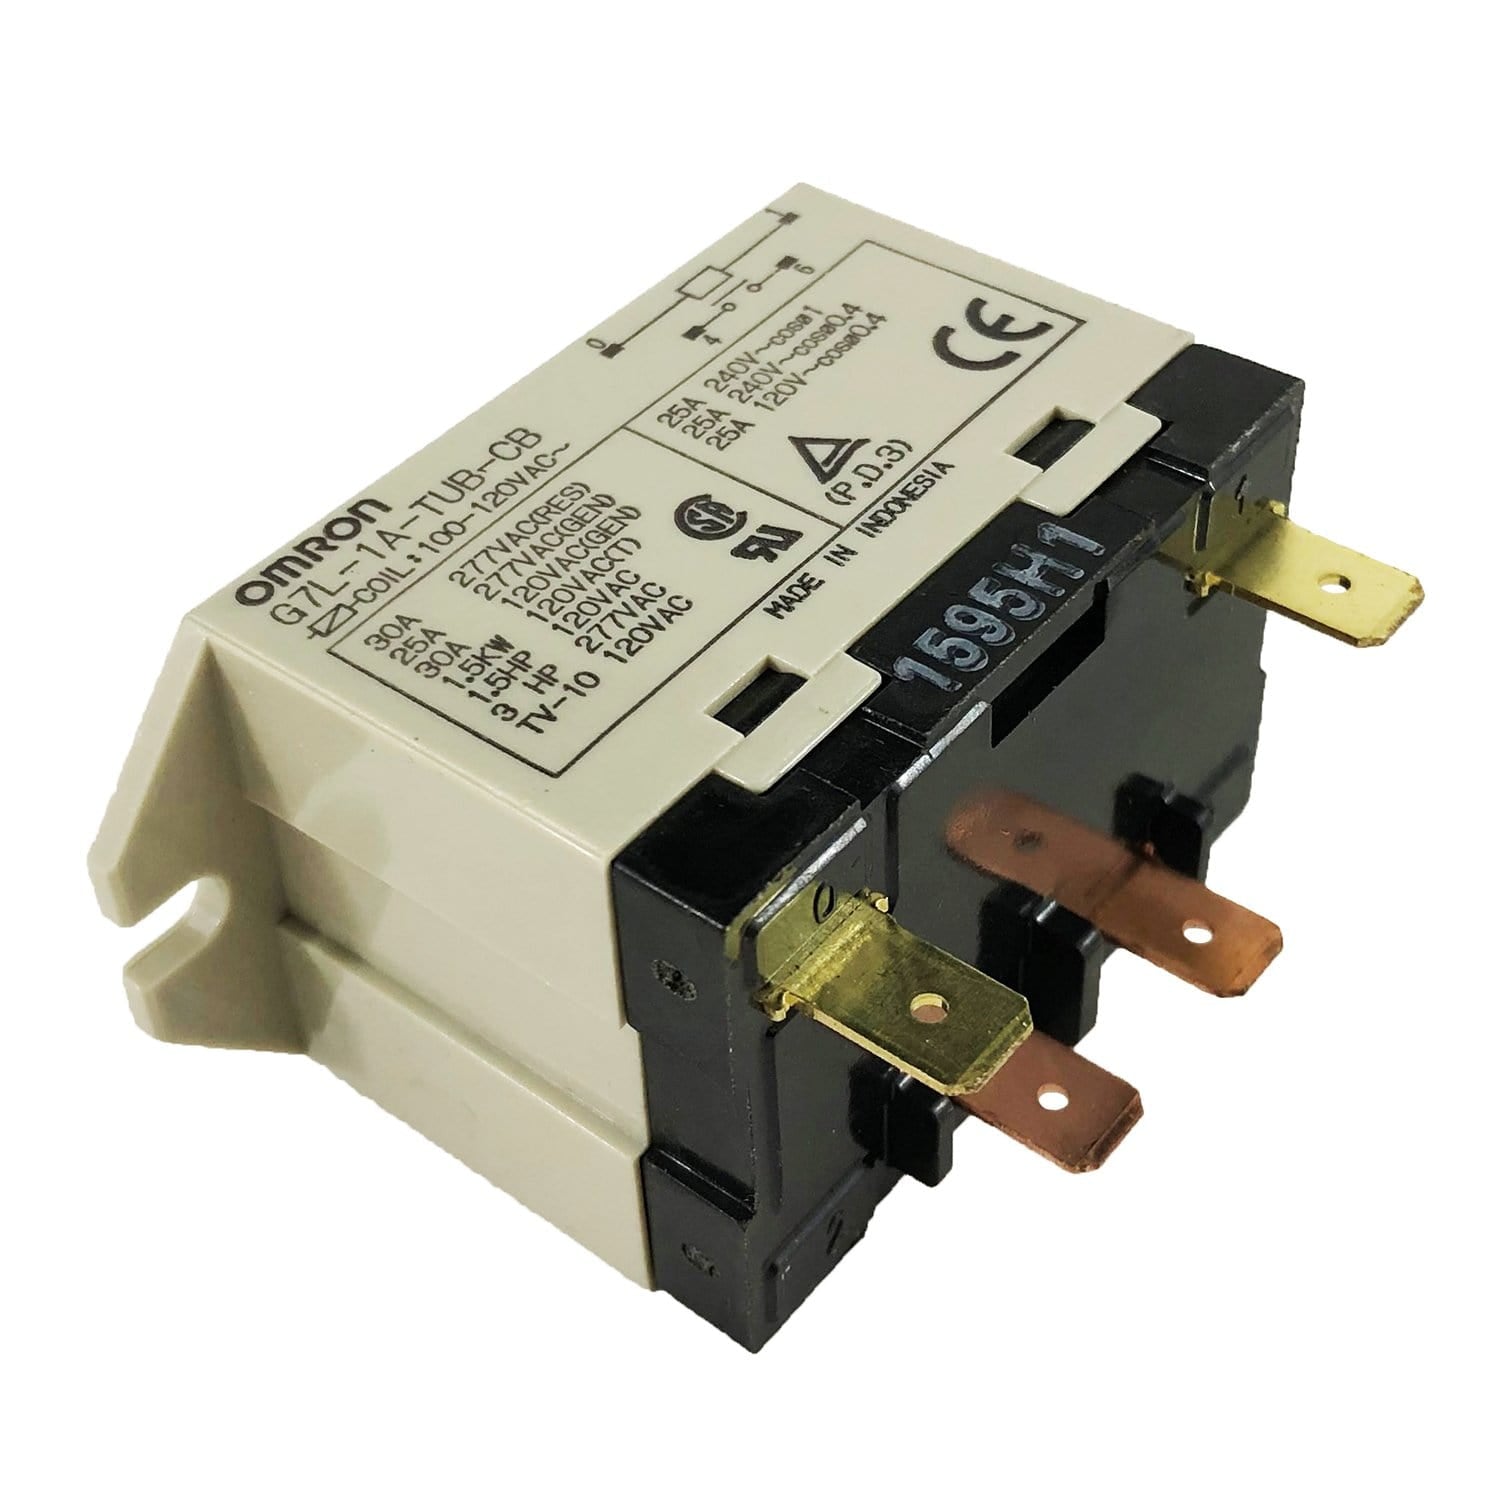 All Points F10699 Relay # G7l-1a-Tub-Cb Replaces True 800182